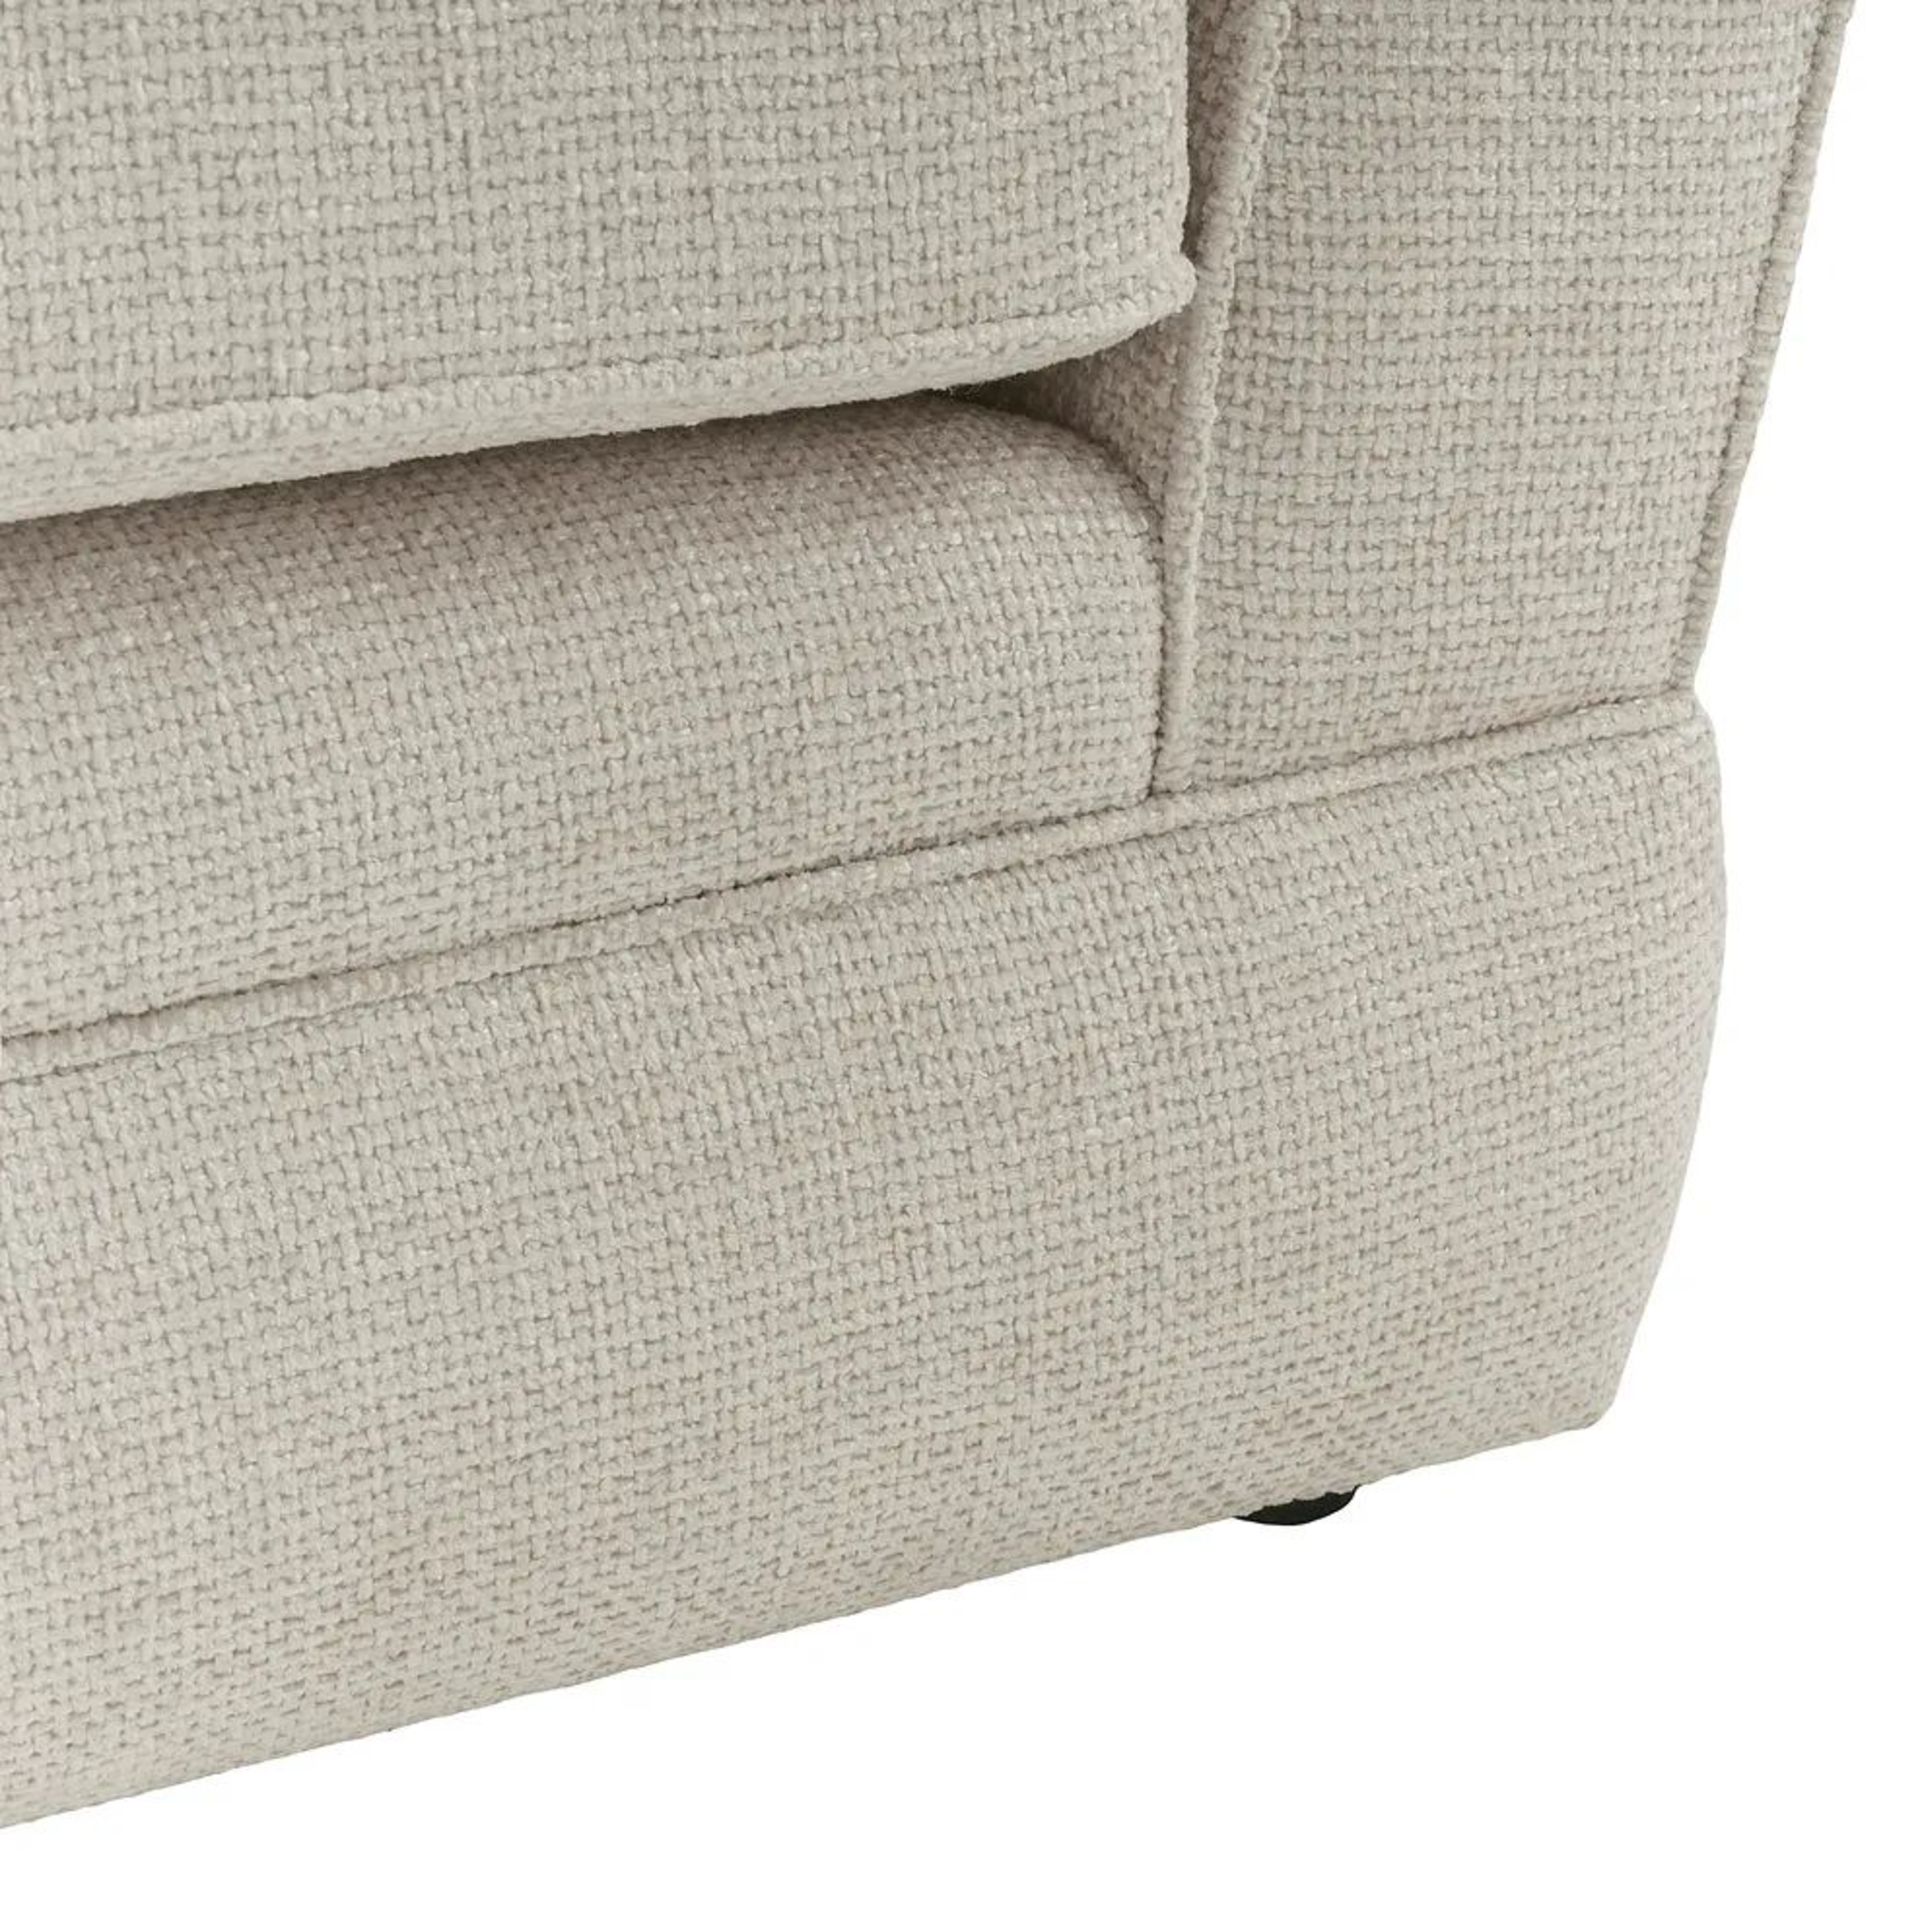 BRAND NEW CARRINGTON 2 Seater Pillow Back Sofa - NATURAL FABRIC. RRP £999. Make our 3-seater - Image 6 of 8